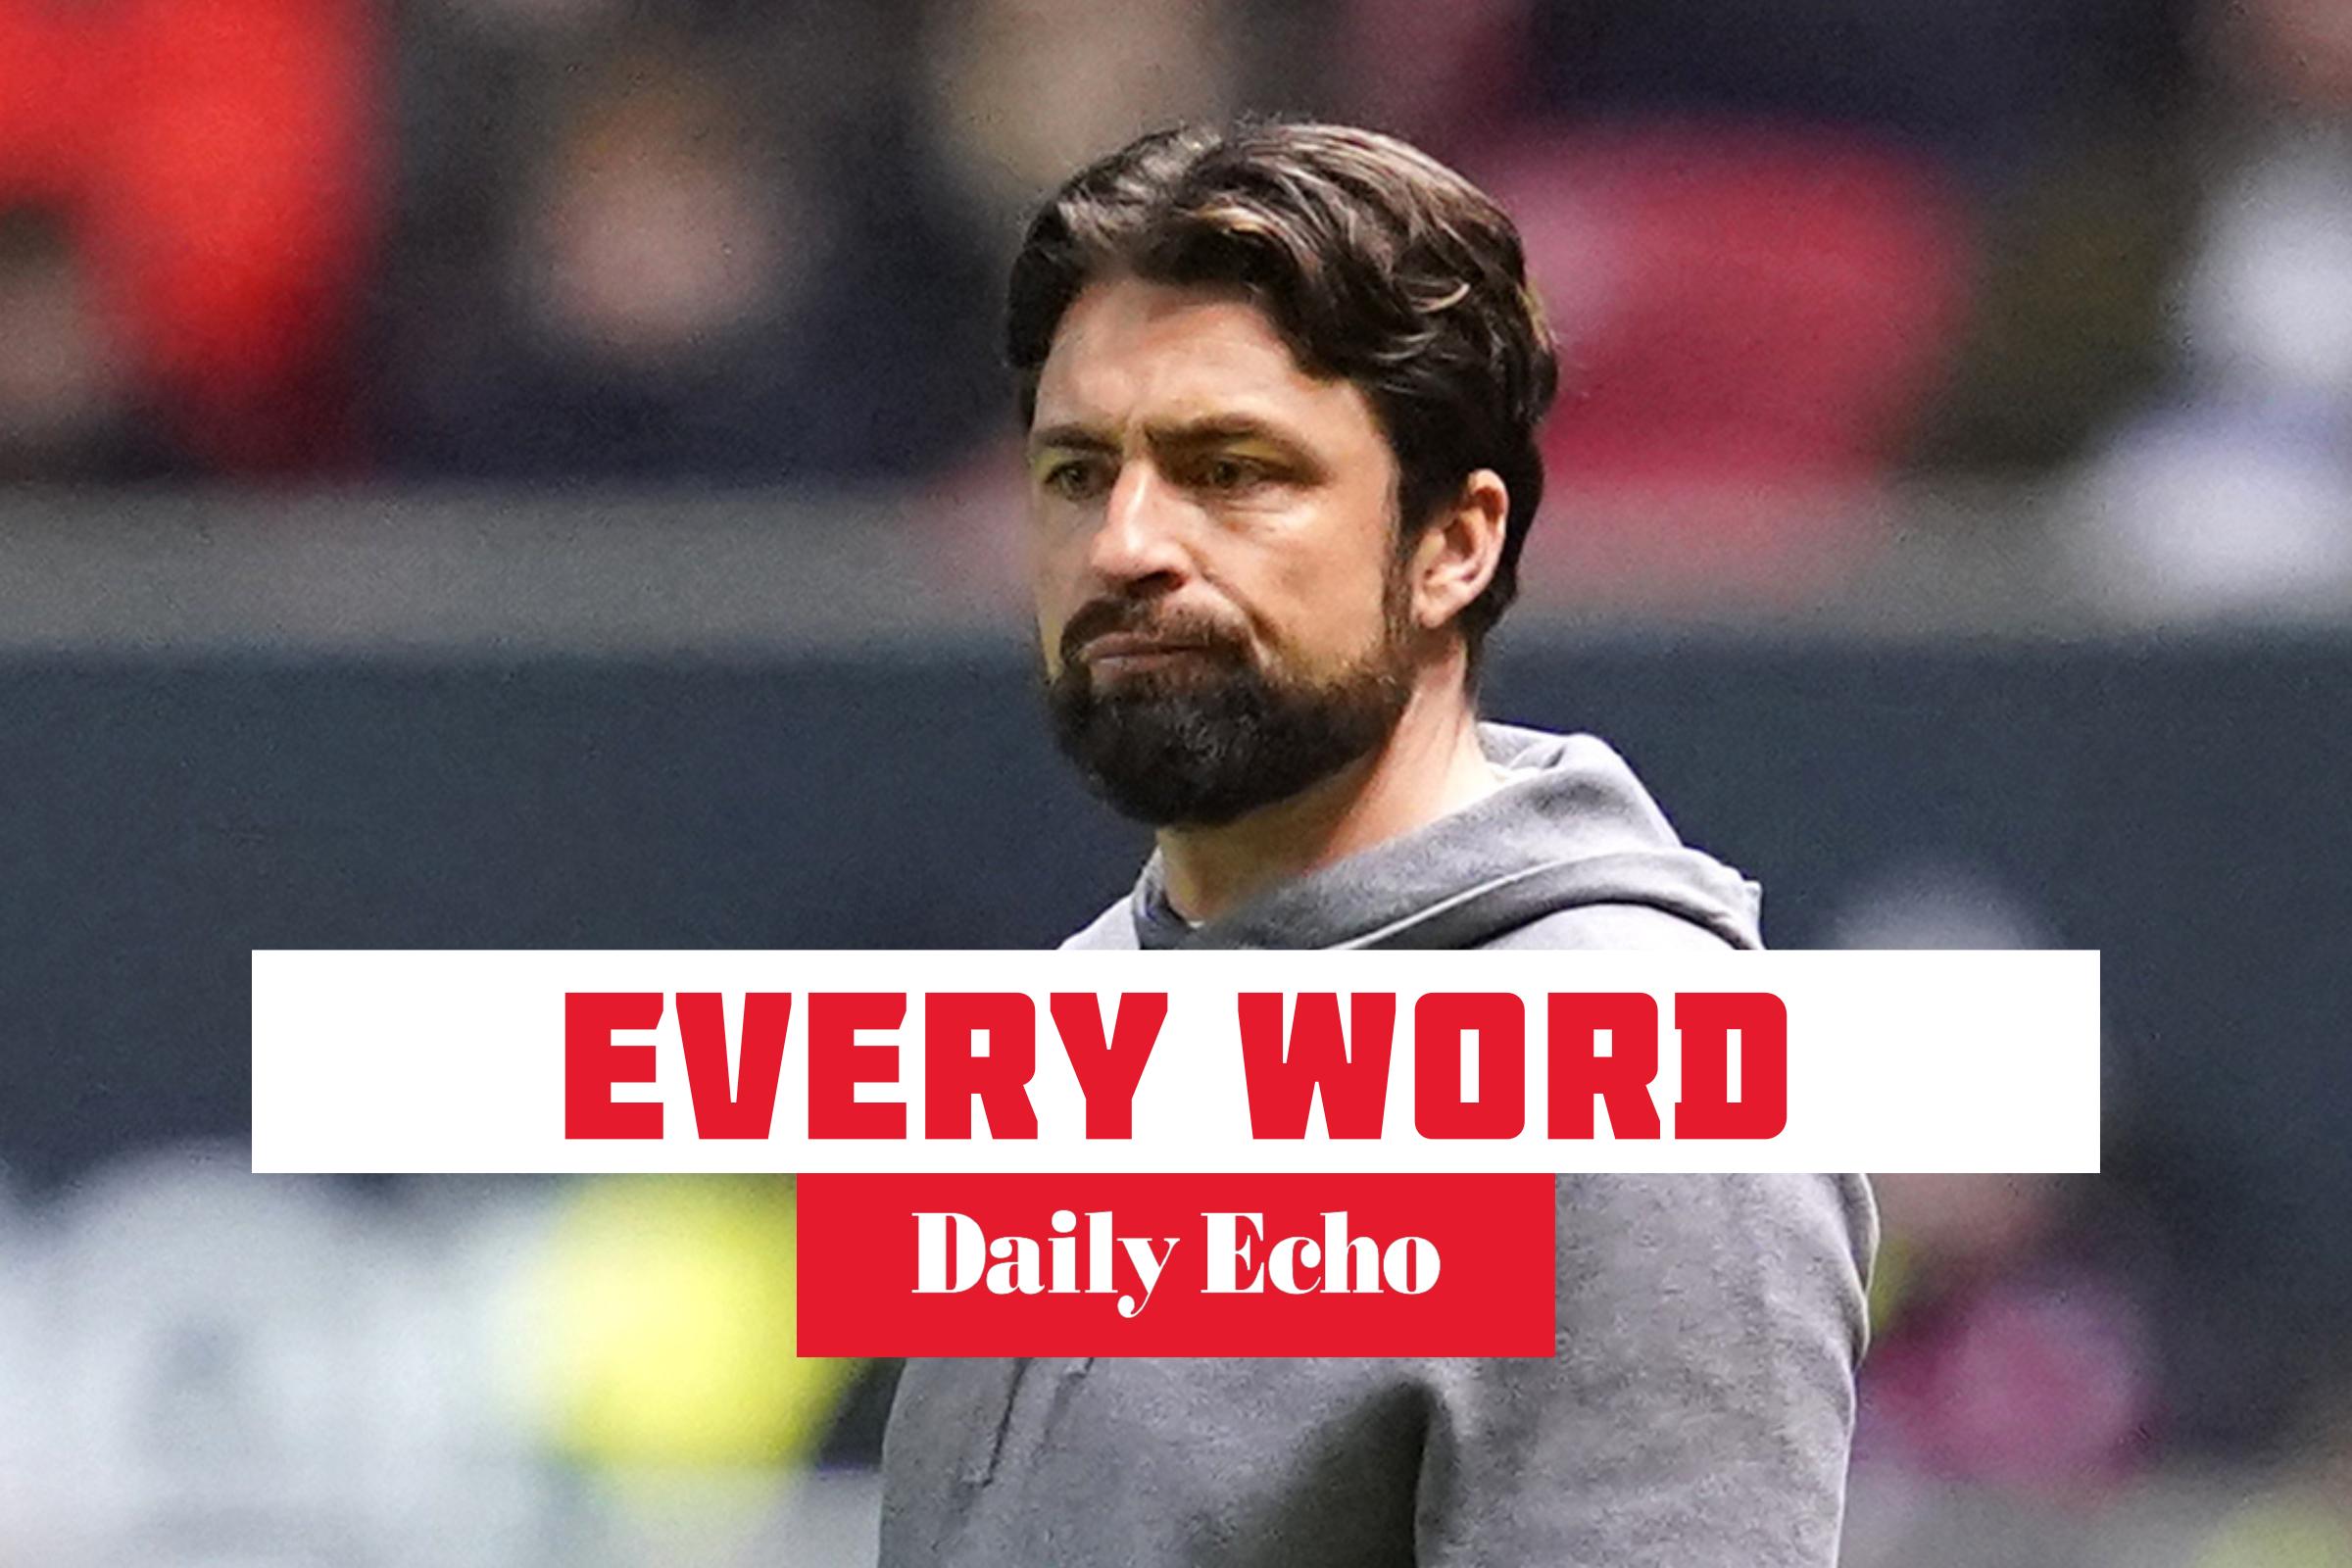 Every word Southampton boss said on Wilcox, Downes and West Brom